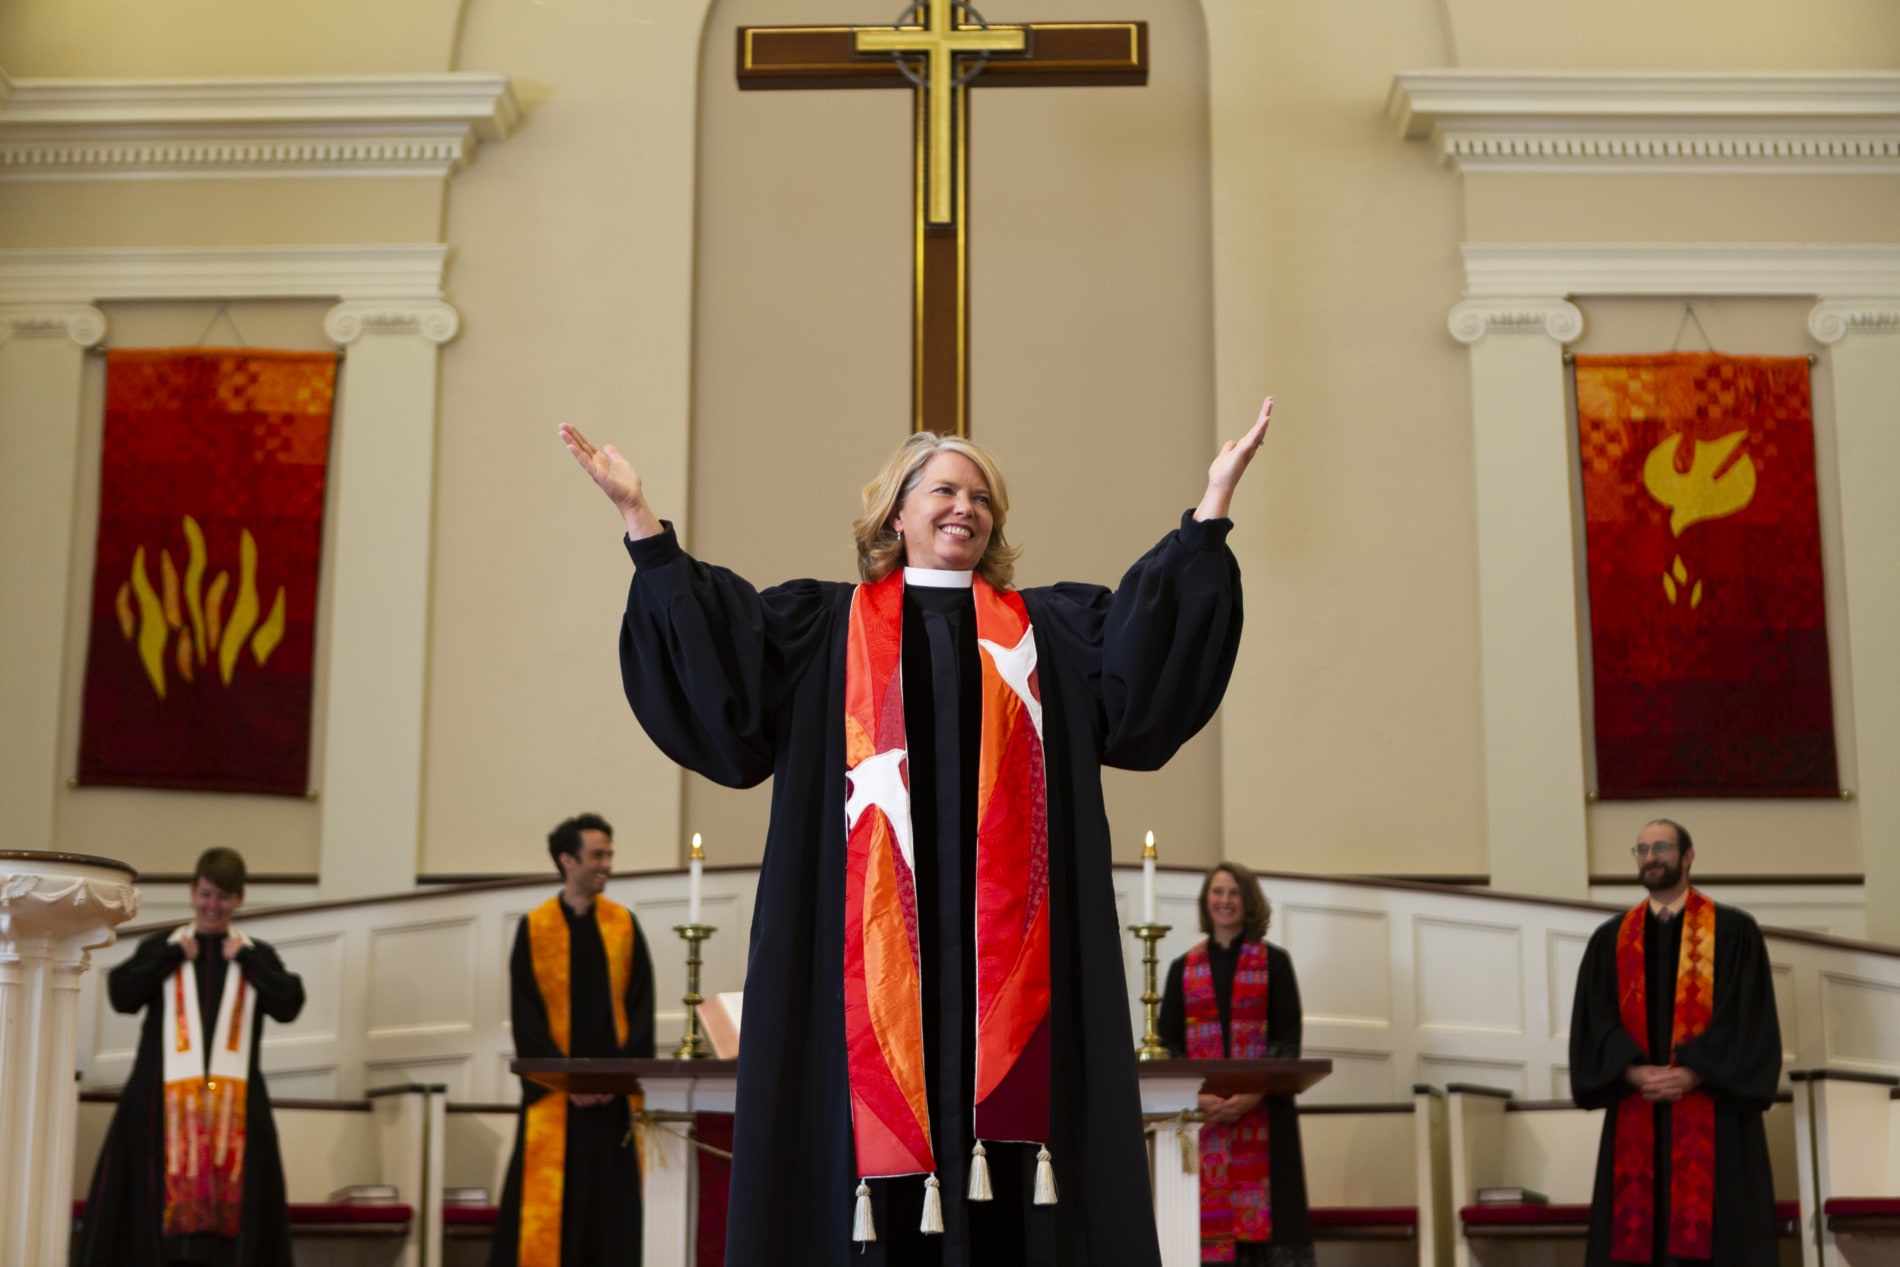 Rev. Sarah Butter lifts her hands to exhort the congregation in worship